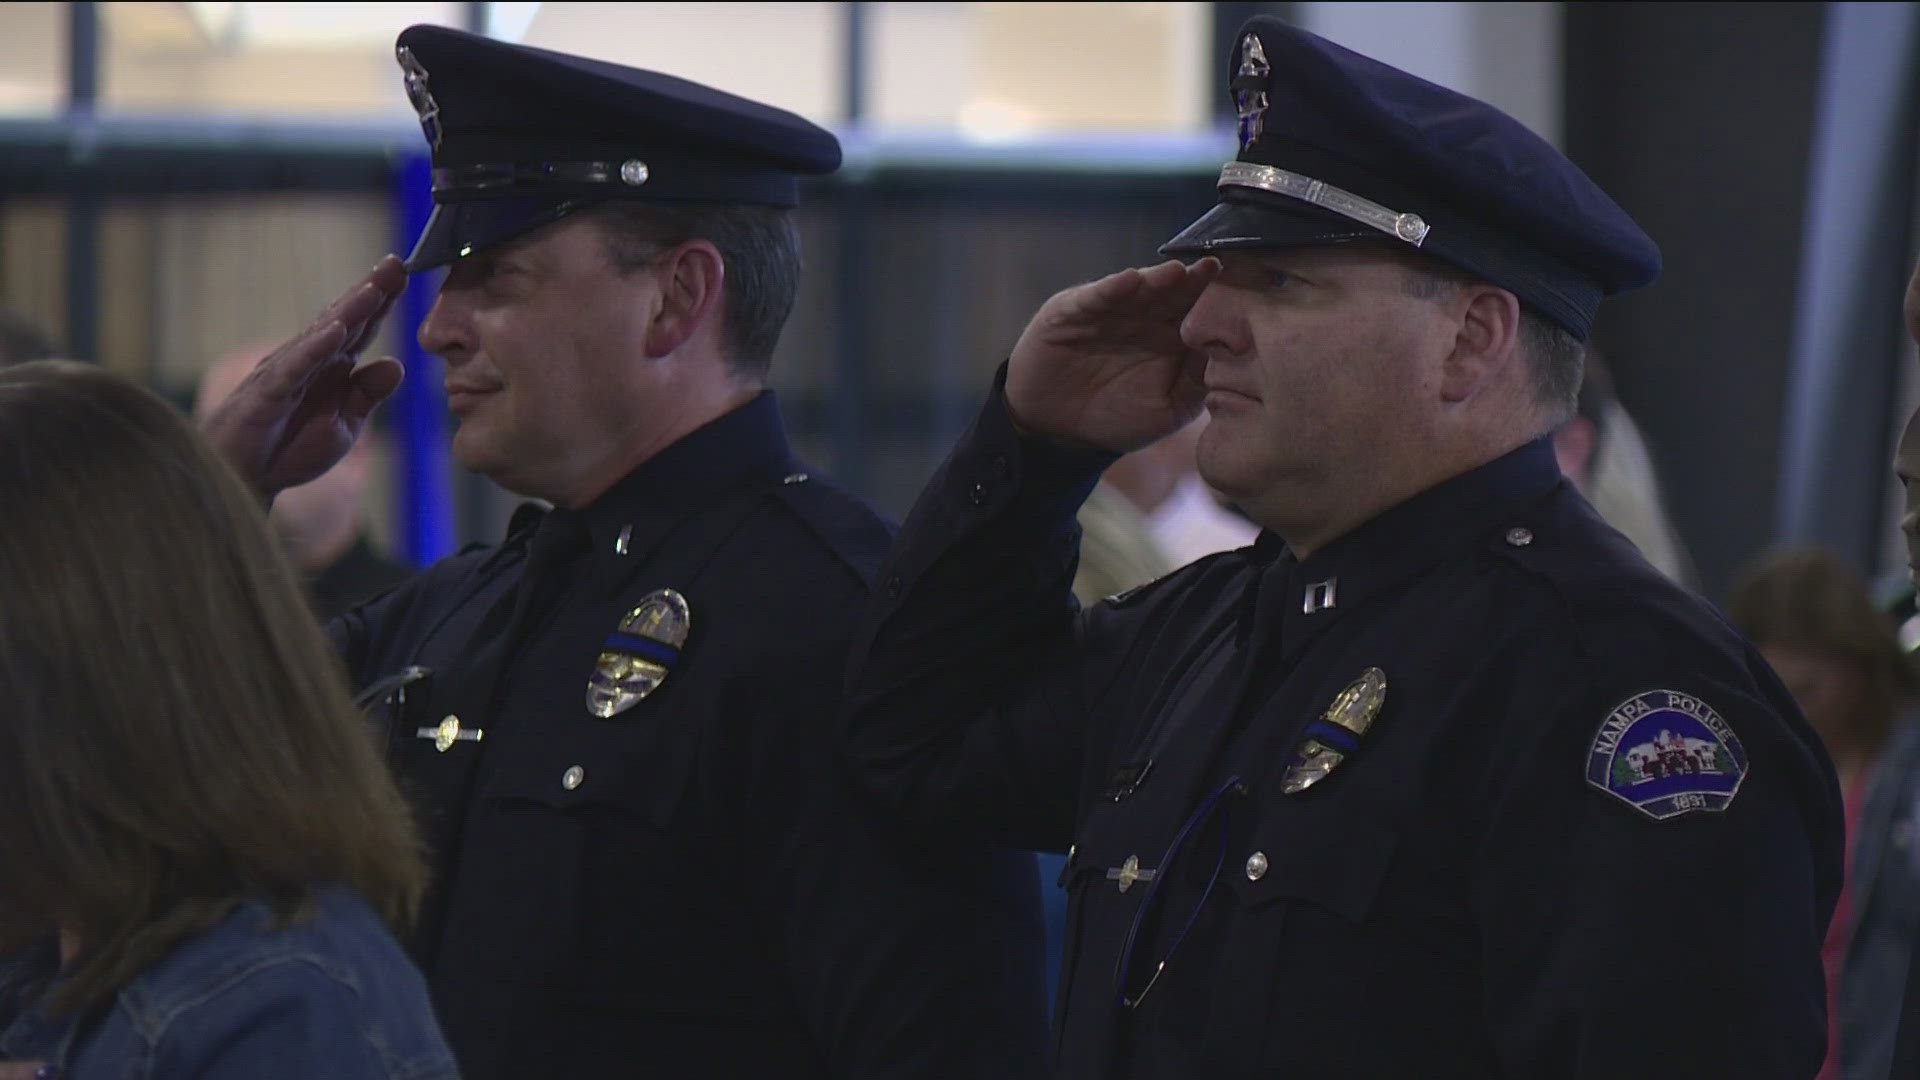 Friday's 12th annual memorial ceremony included a police motorcade, posting of the colors and the reading of the names of fallen officers from across the state.